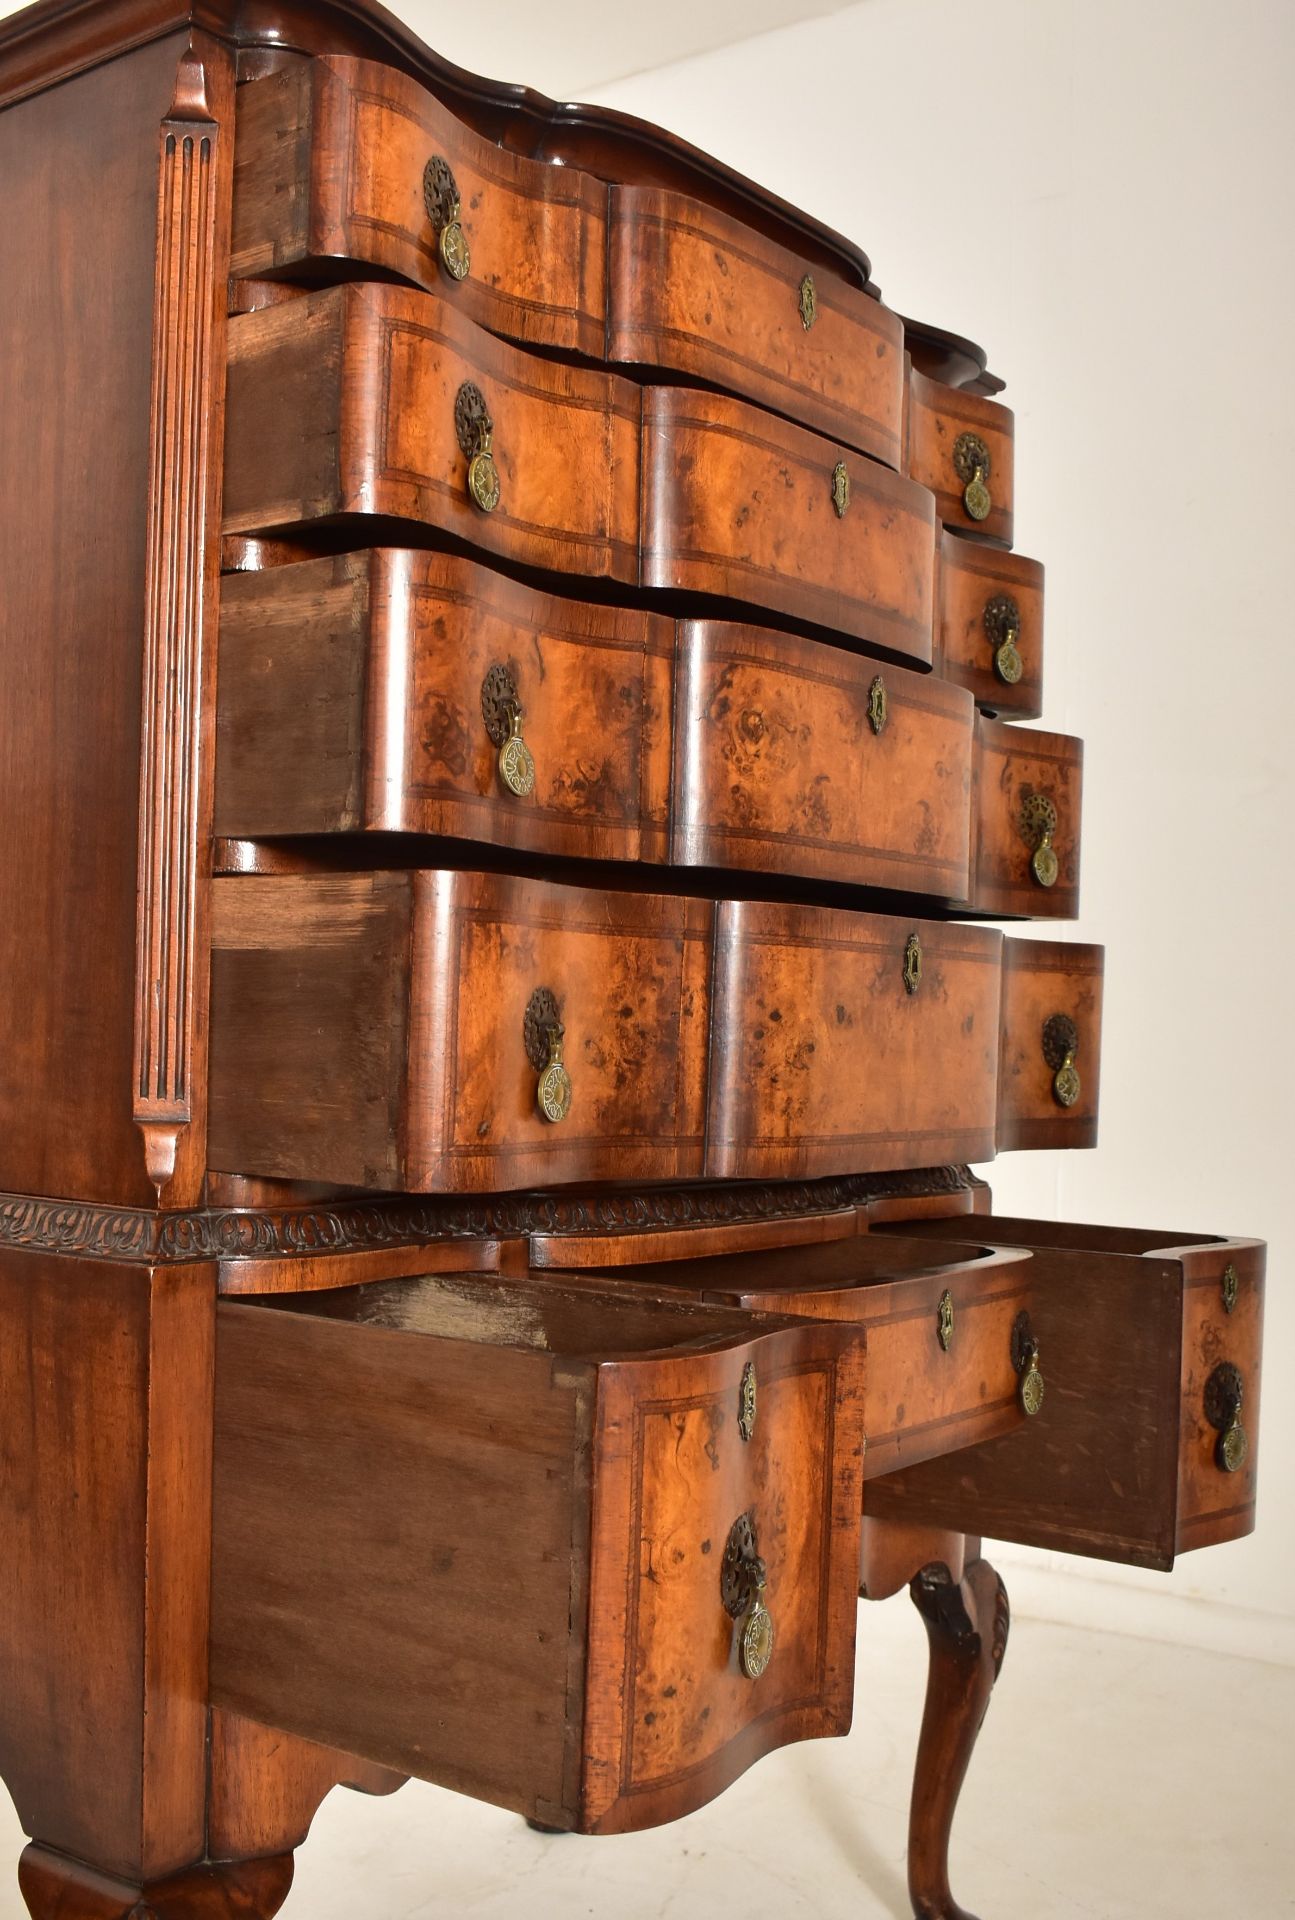 QUEEN ANNE REVIVAL WALNUT SERPENTINE FRONT CHEST ON LEGS - Image 2 of 6